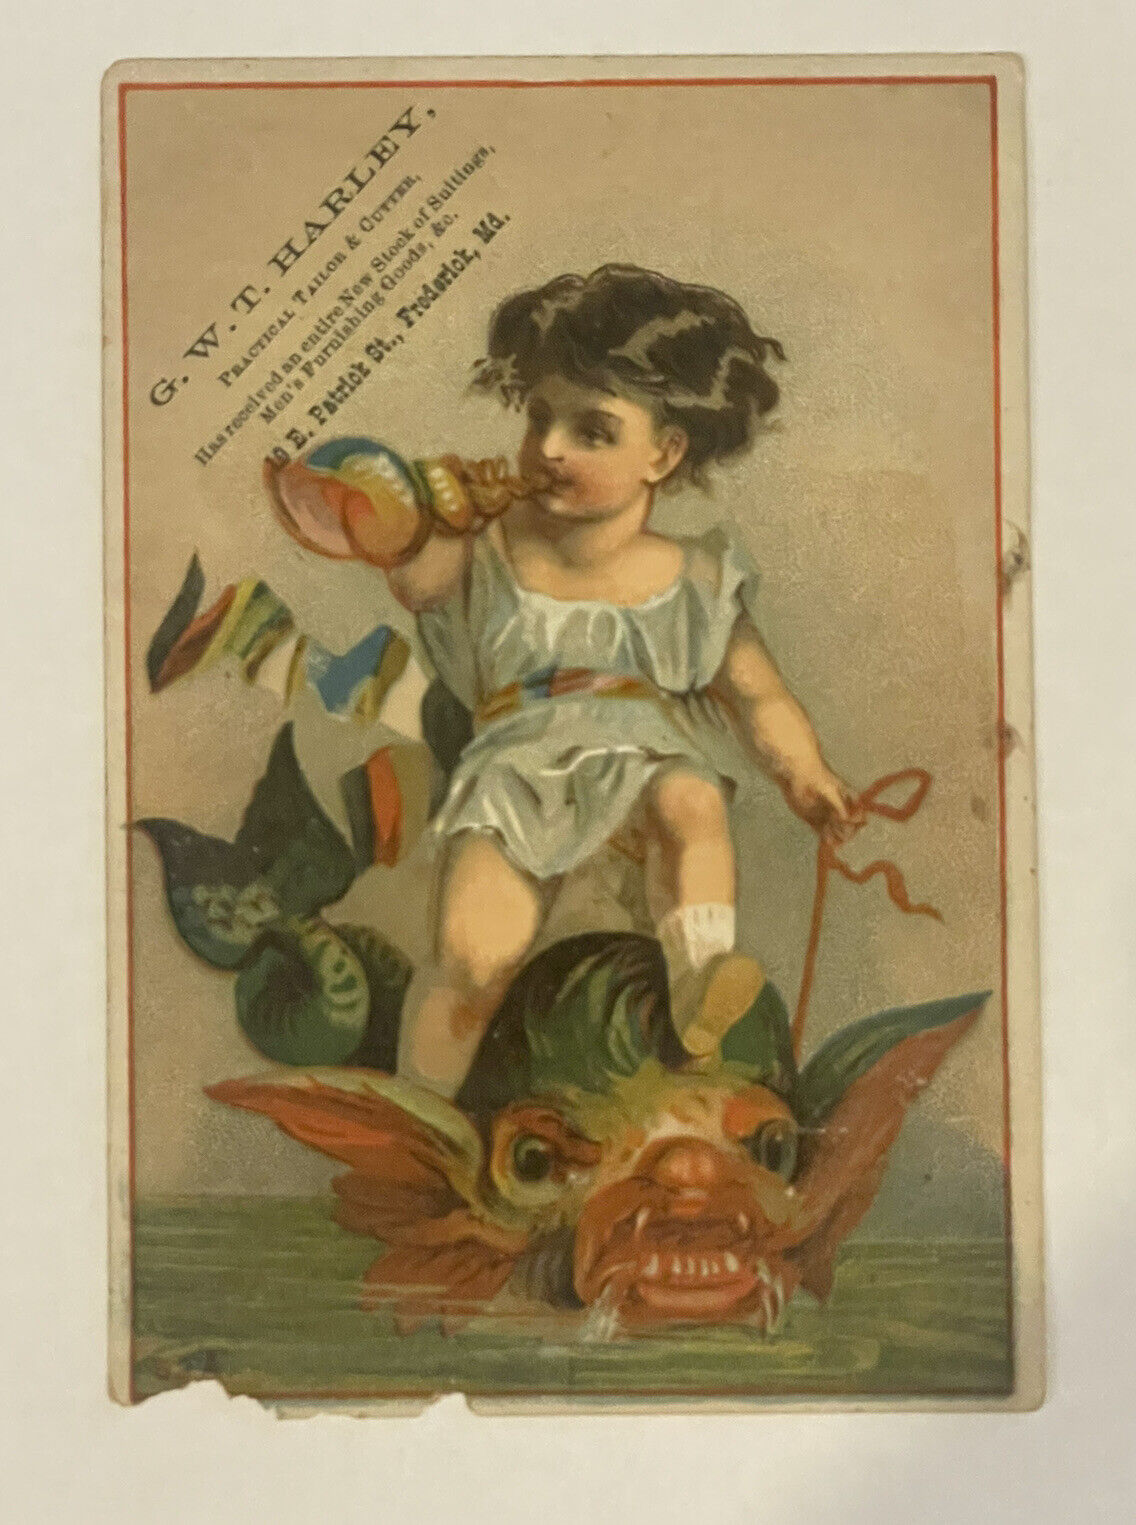 1890s Girl Riding Fish- G.W.T Harley Tailor & Cutter Frederick,MD Trade Card